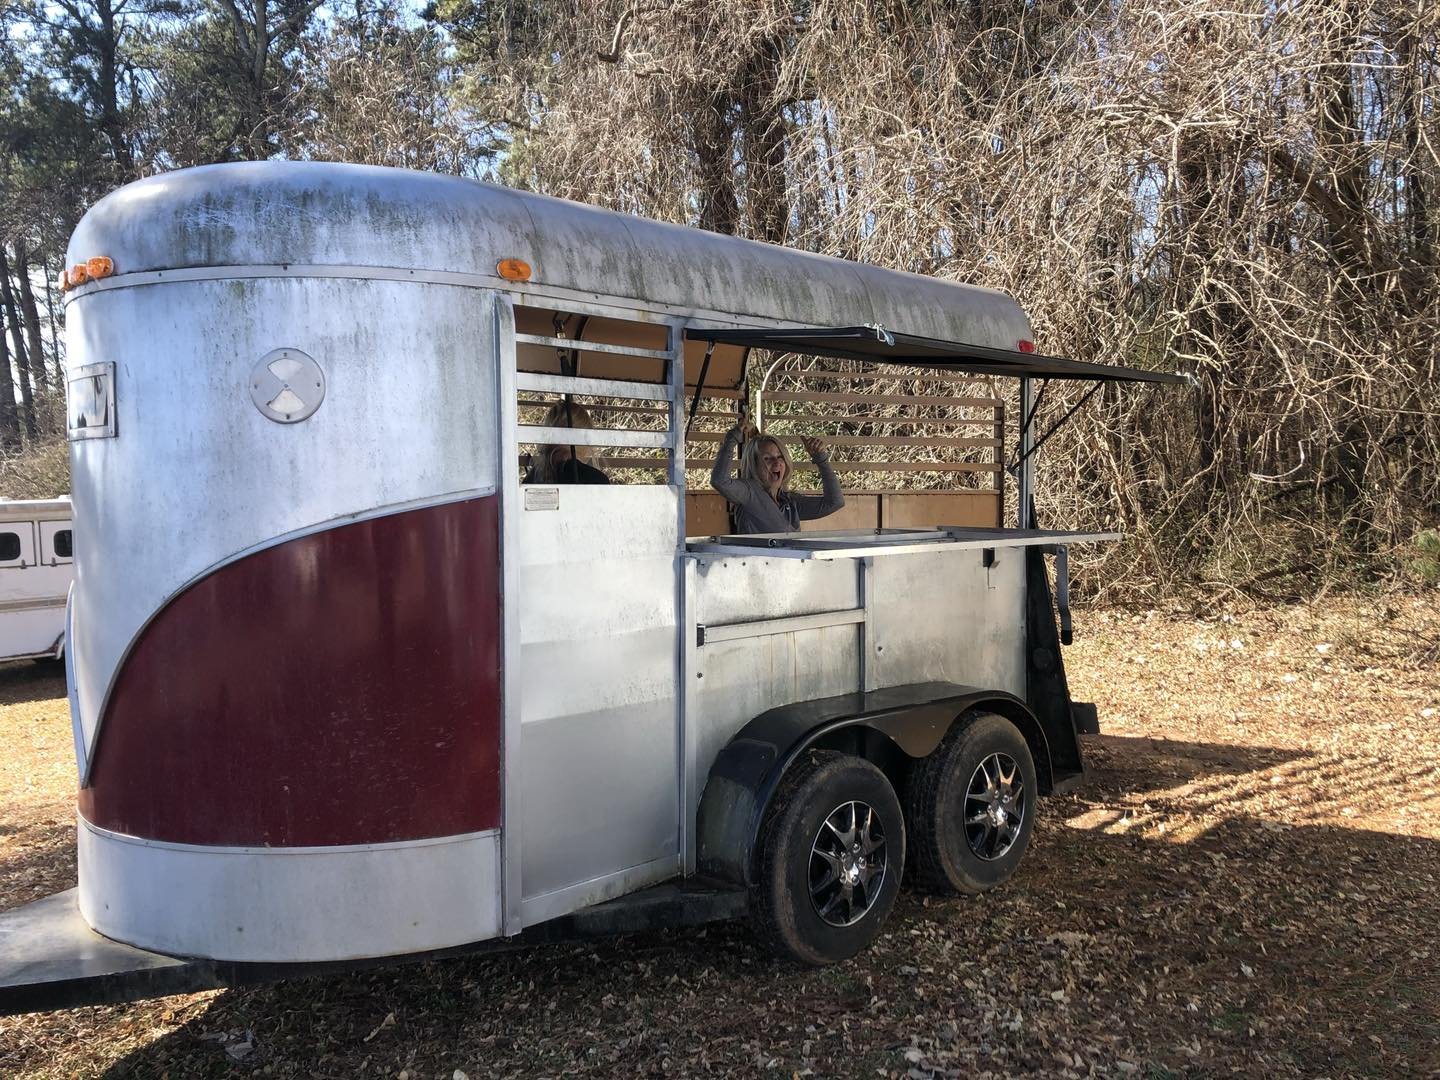 Flashback Friday! Remember when Chappy was JUST a regular old horse trailer? He used to cart around my friend&rsquo;s horses while she was showing. She grew up and the trailer sat until I had this wild idea to build a bar!! &ldquo;drink with horse pe